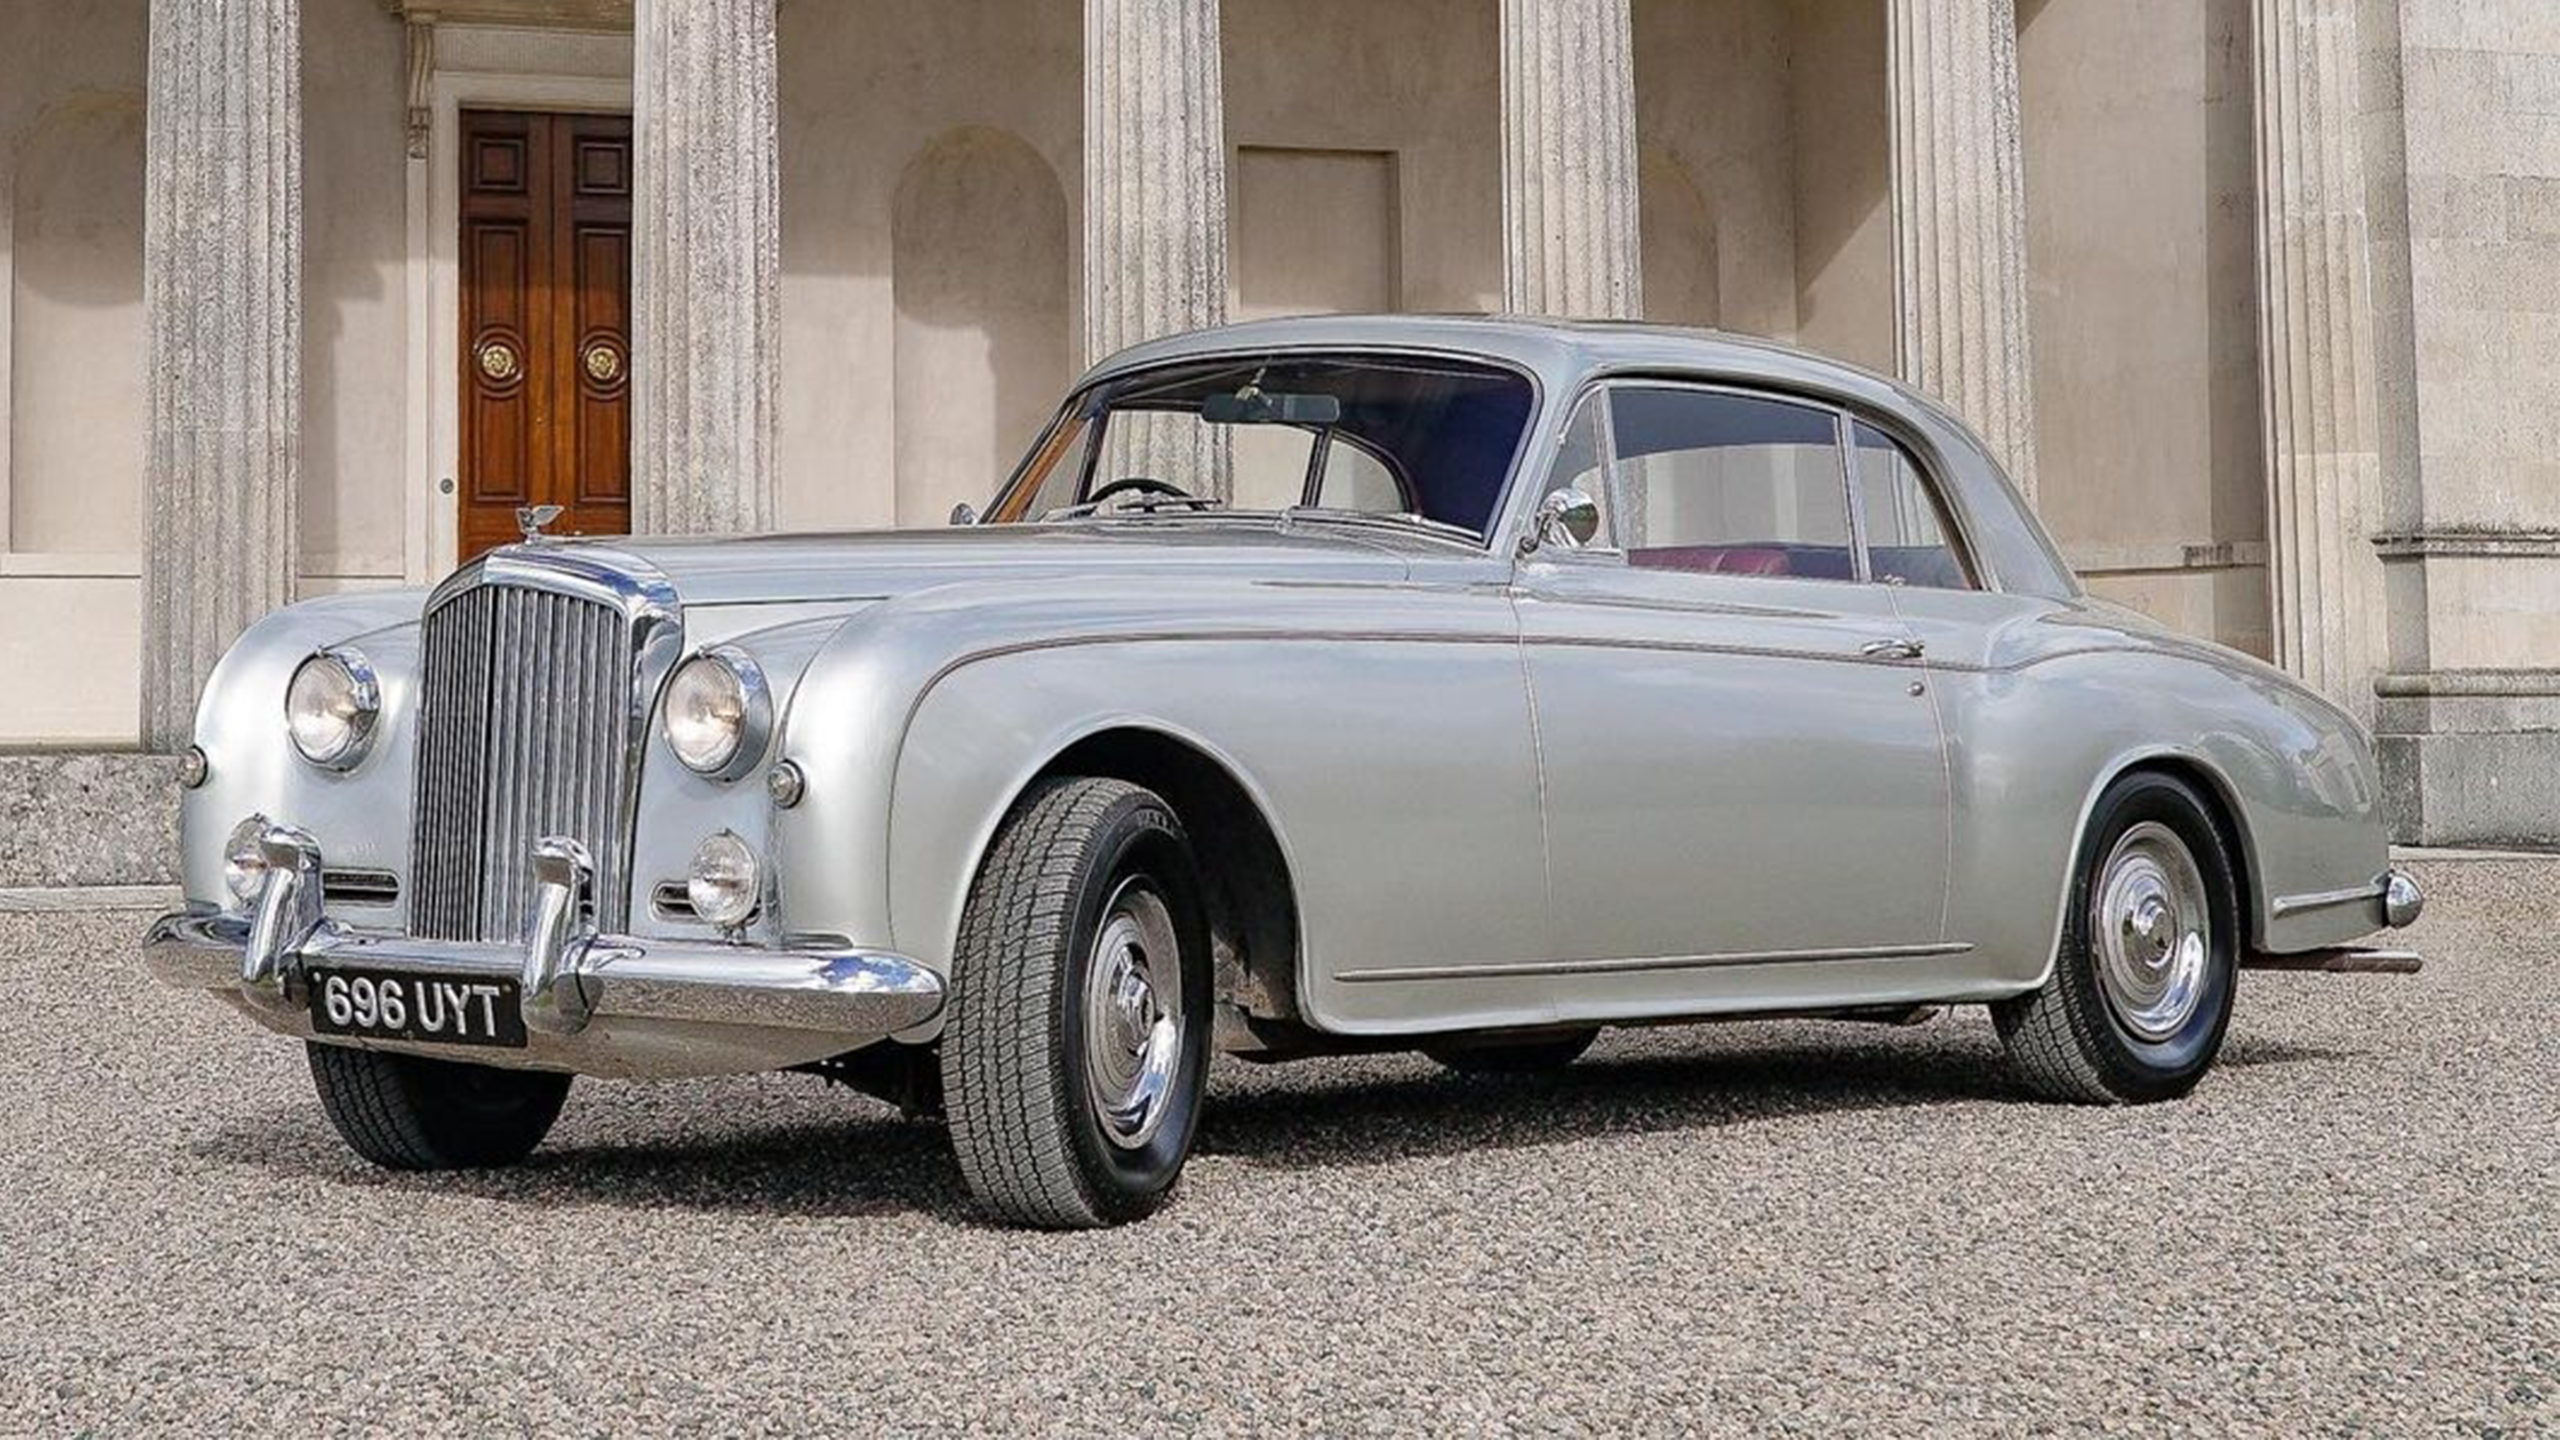 The Bentley S1 Continental Sports Saloon: A Classic Car with Timeless Elegance